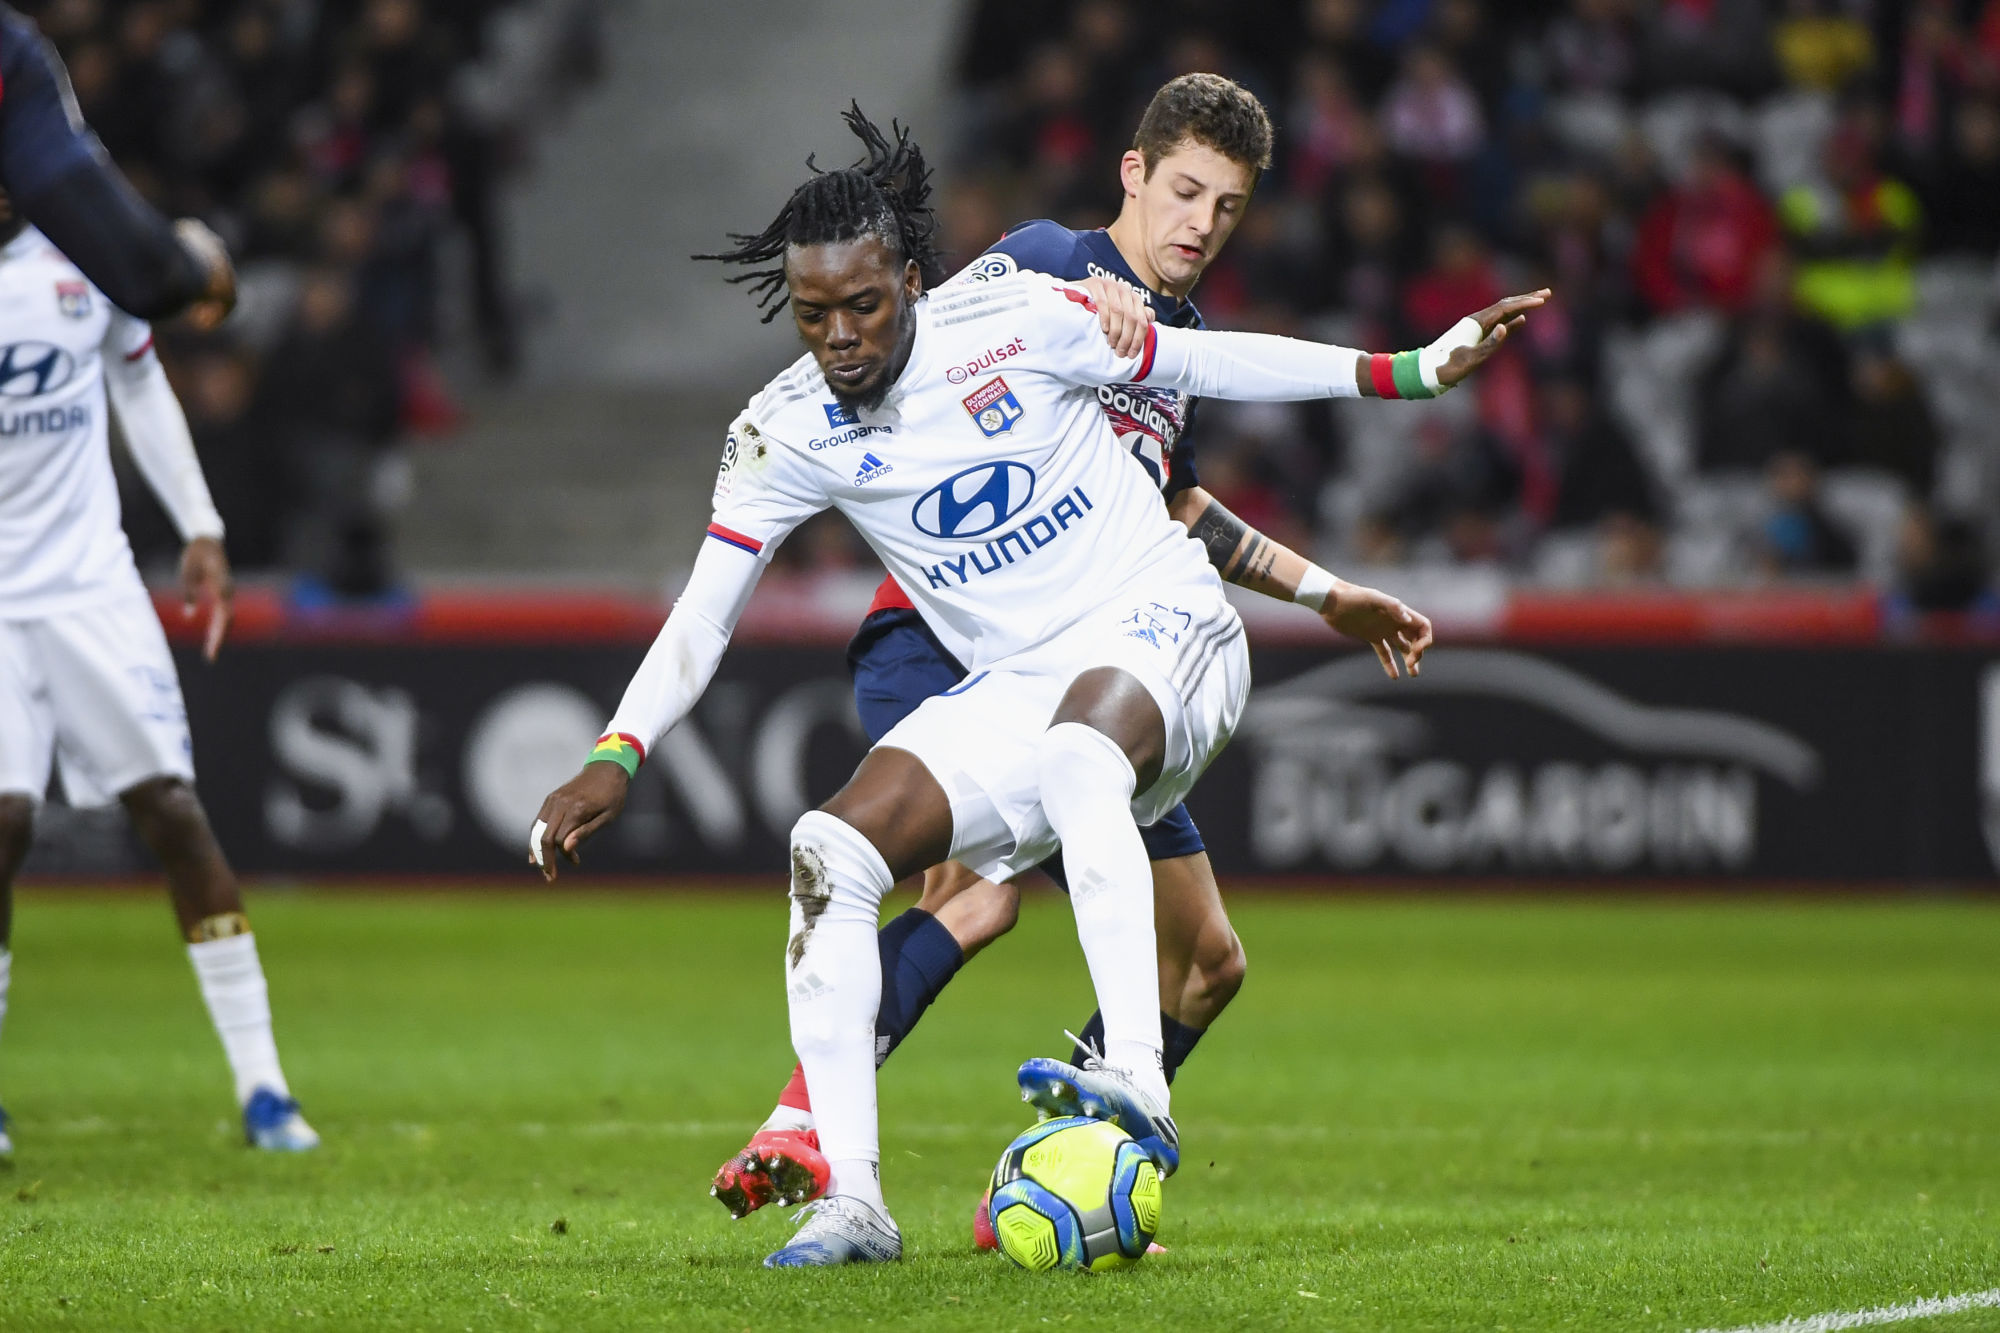 Bertrand TRAORE of Olympique Lyonnais and Domagoj BRADARIC of Lille during the Ligue 1 match between Lille and Lyon at Stade Pierre-Mauroy on March 8, 2020 in Lille, France. (Photo by Aude Alcover/Icon Sport) - Bertrand TRAORE - Domagoj BRADARIC - Stade Pierre Mauroy - Lille (France)